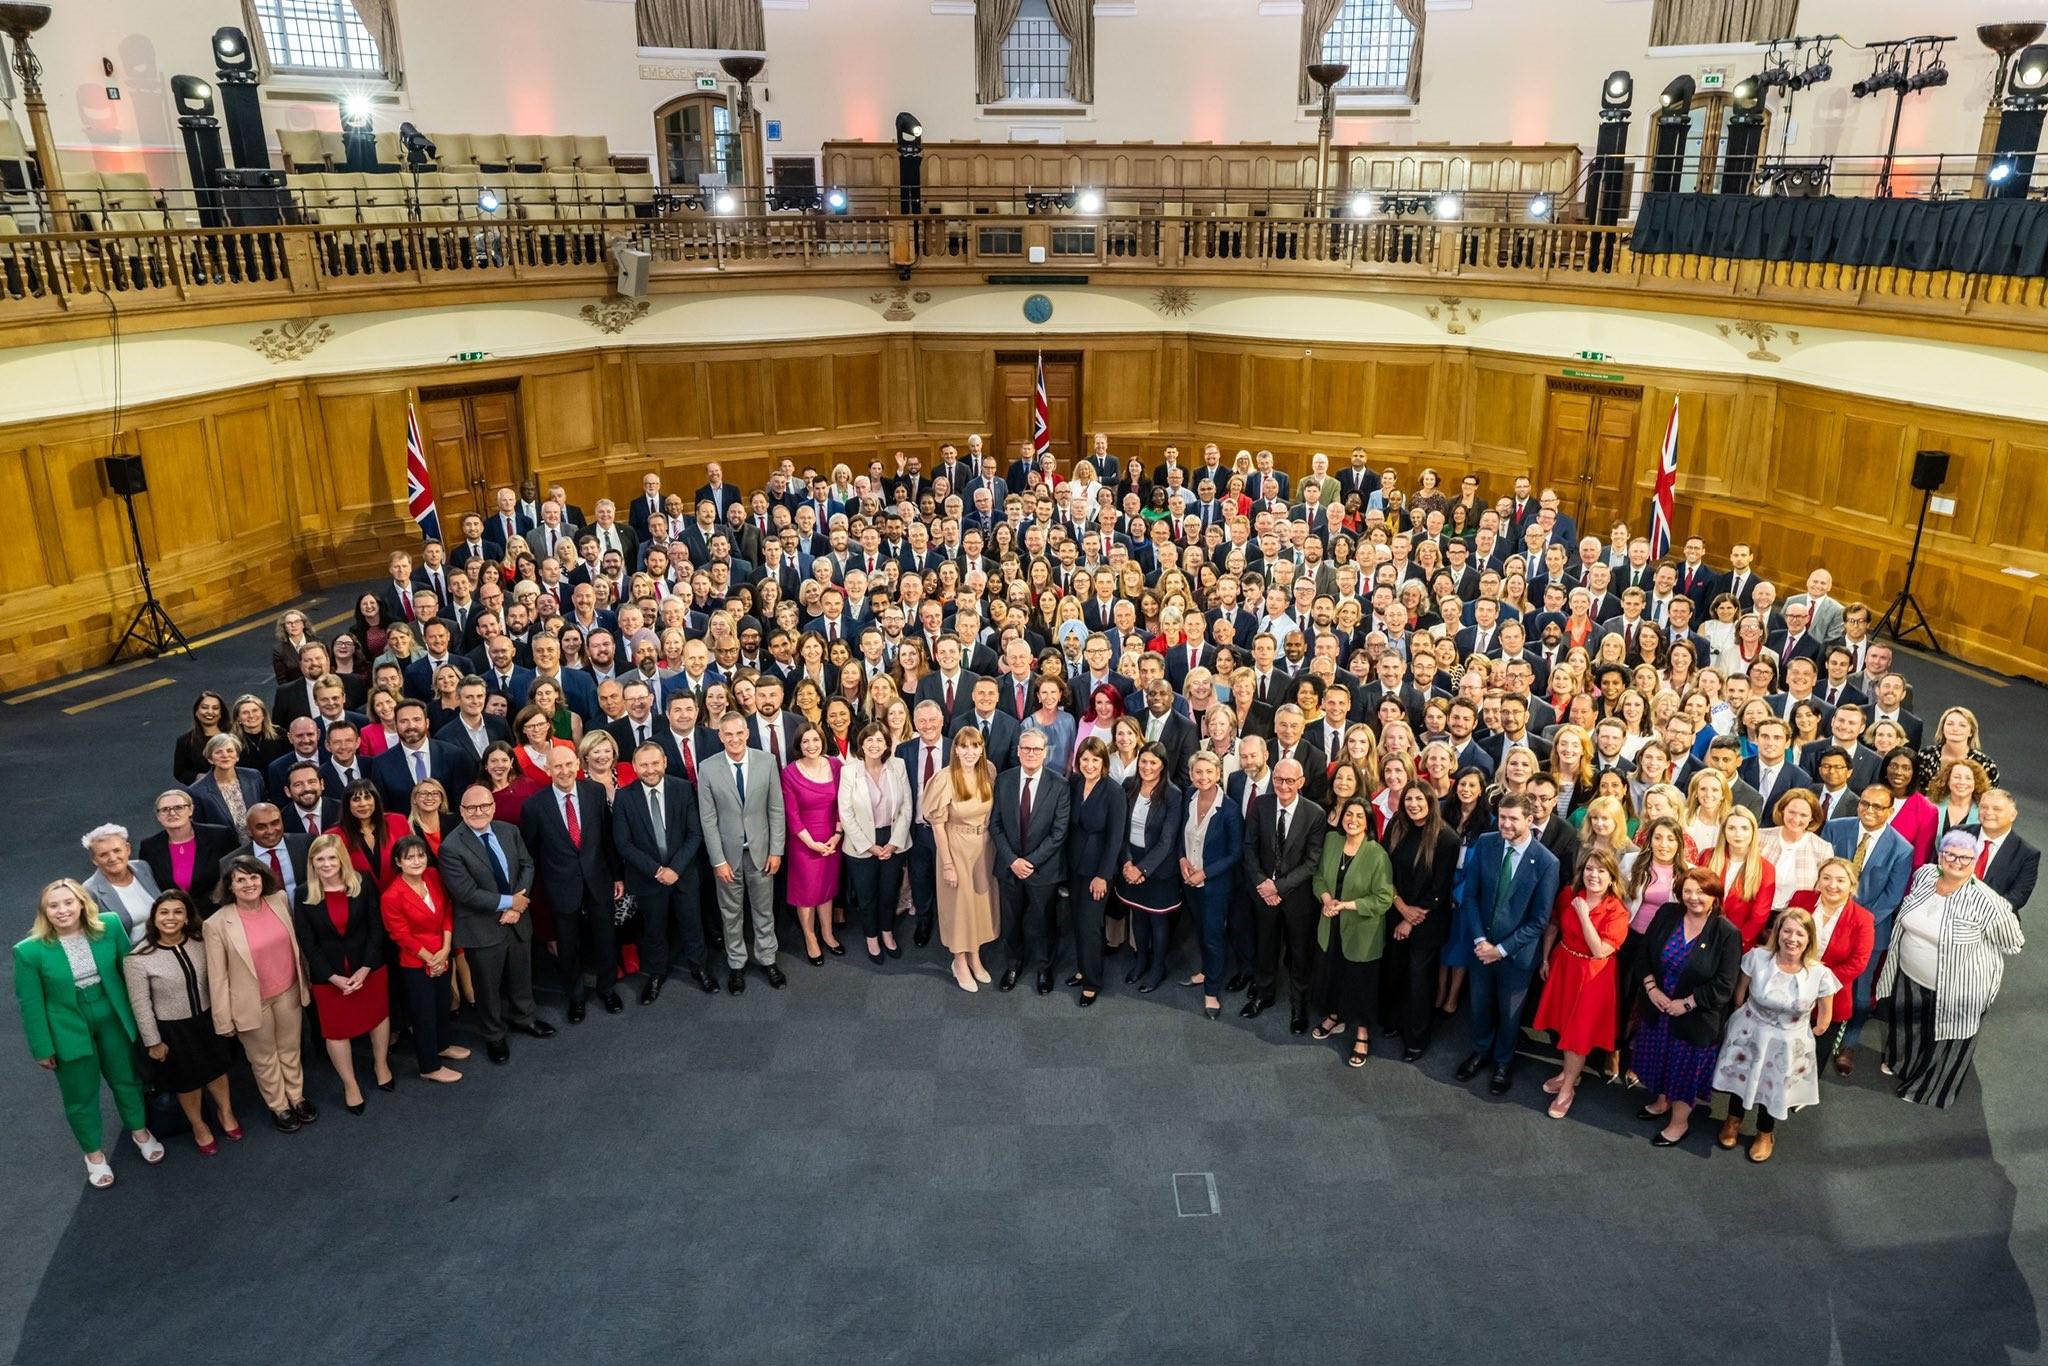 Group shot of the new Labour government. Source: UK Labour